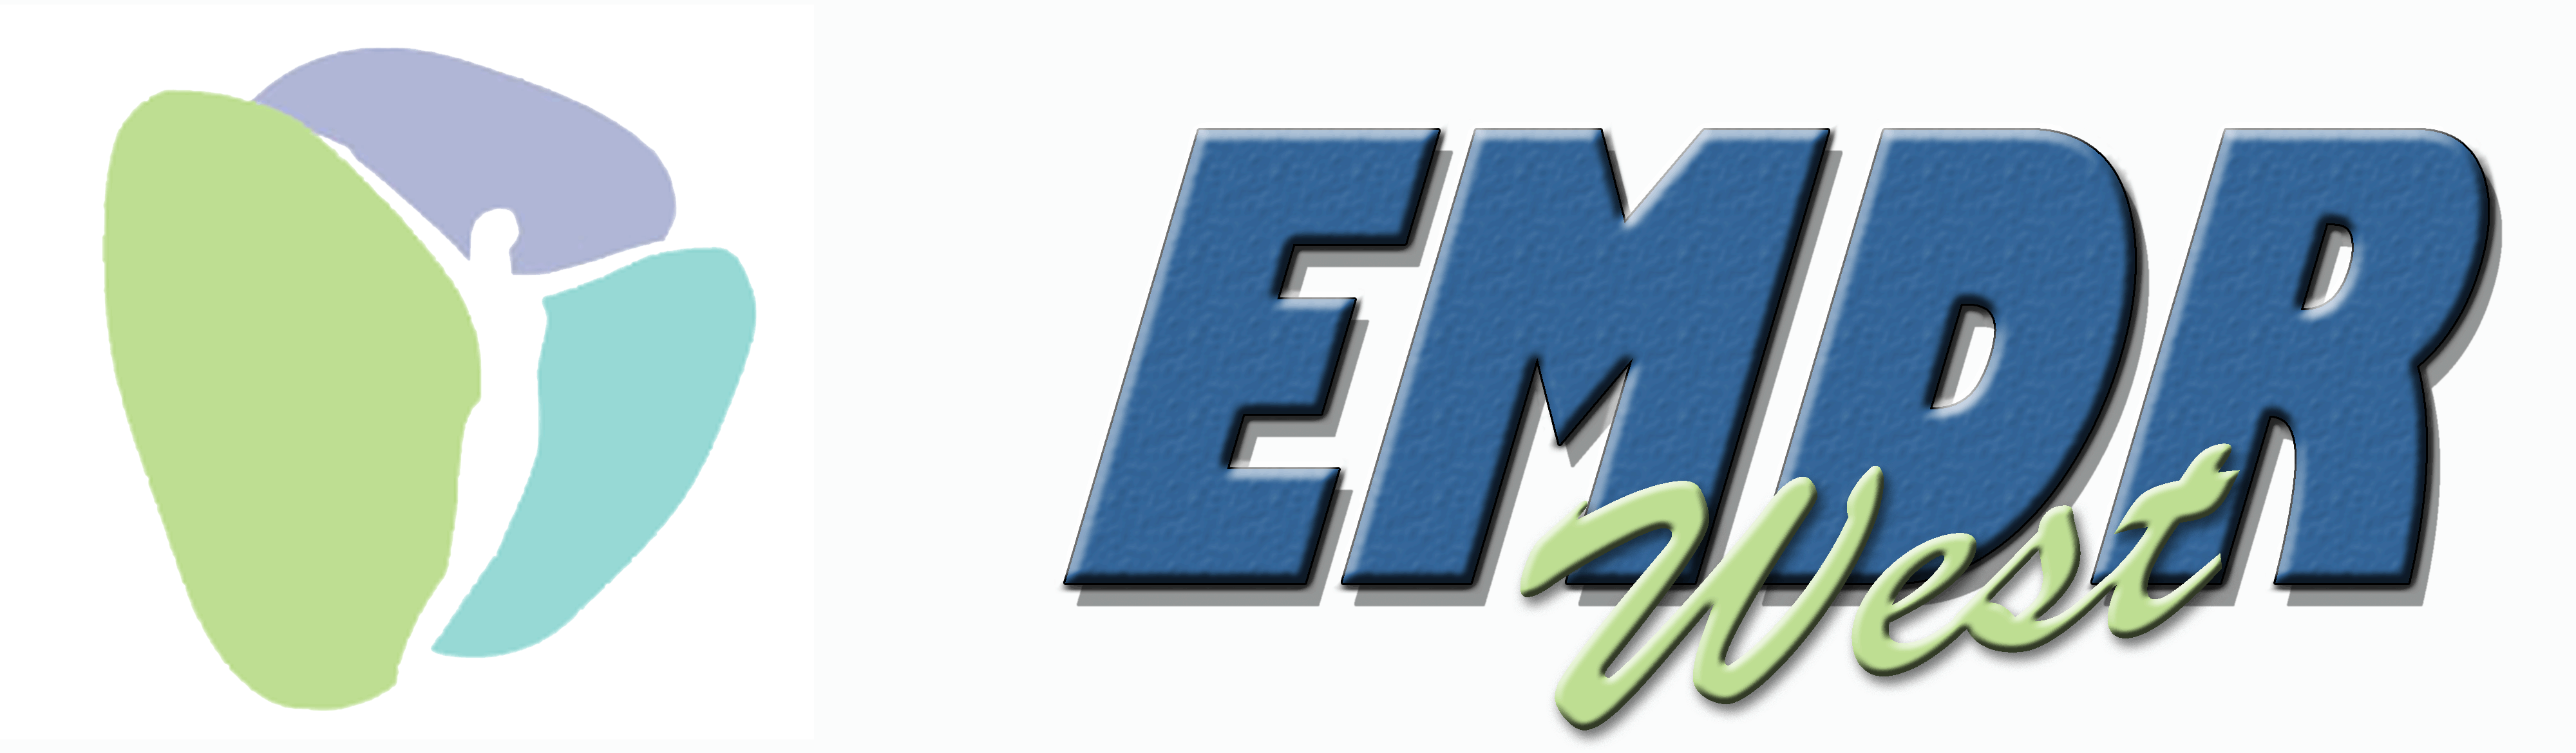 EMDR West Therapy Los Angeles Logo